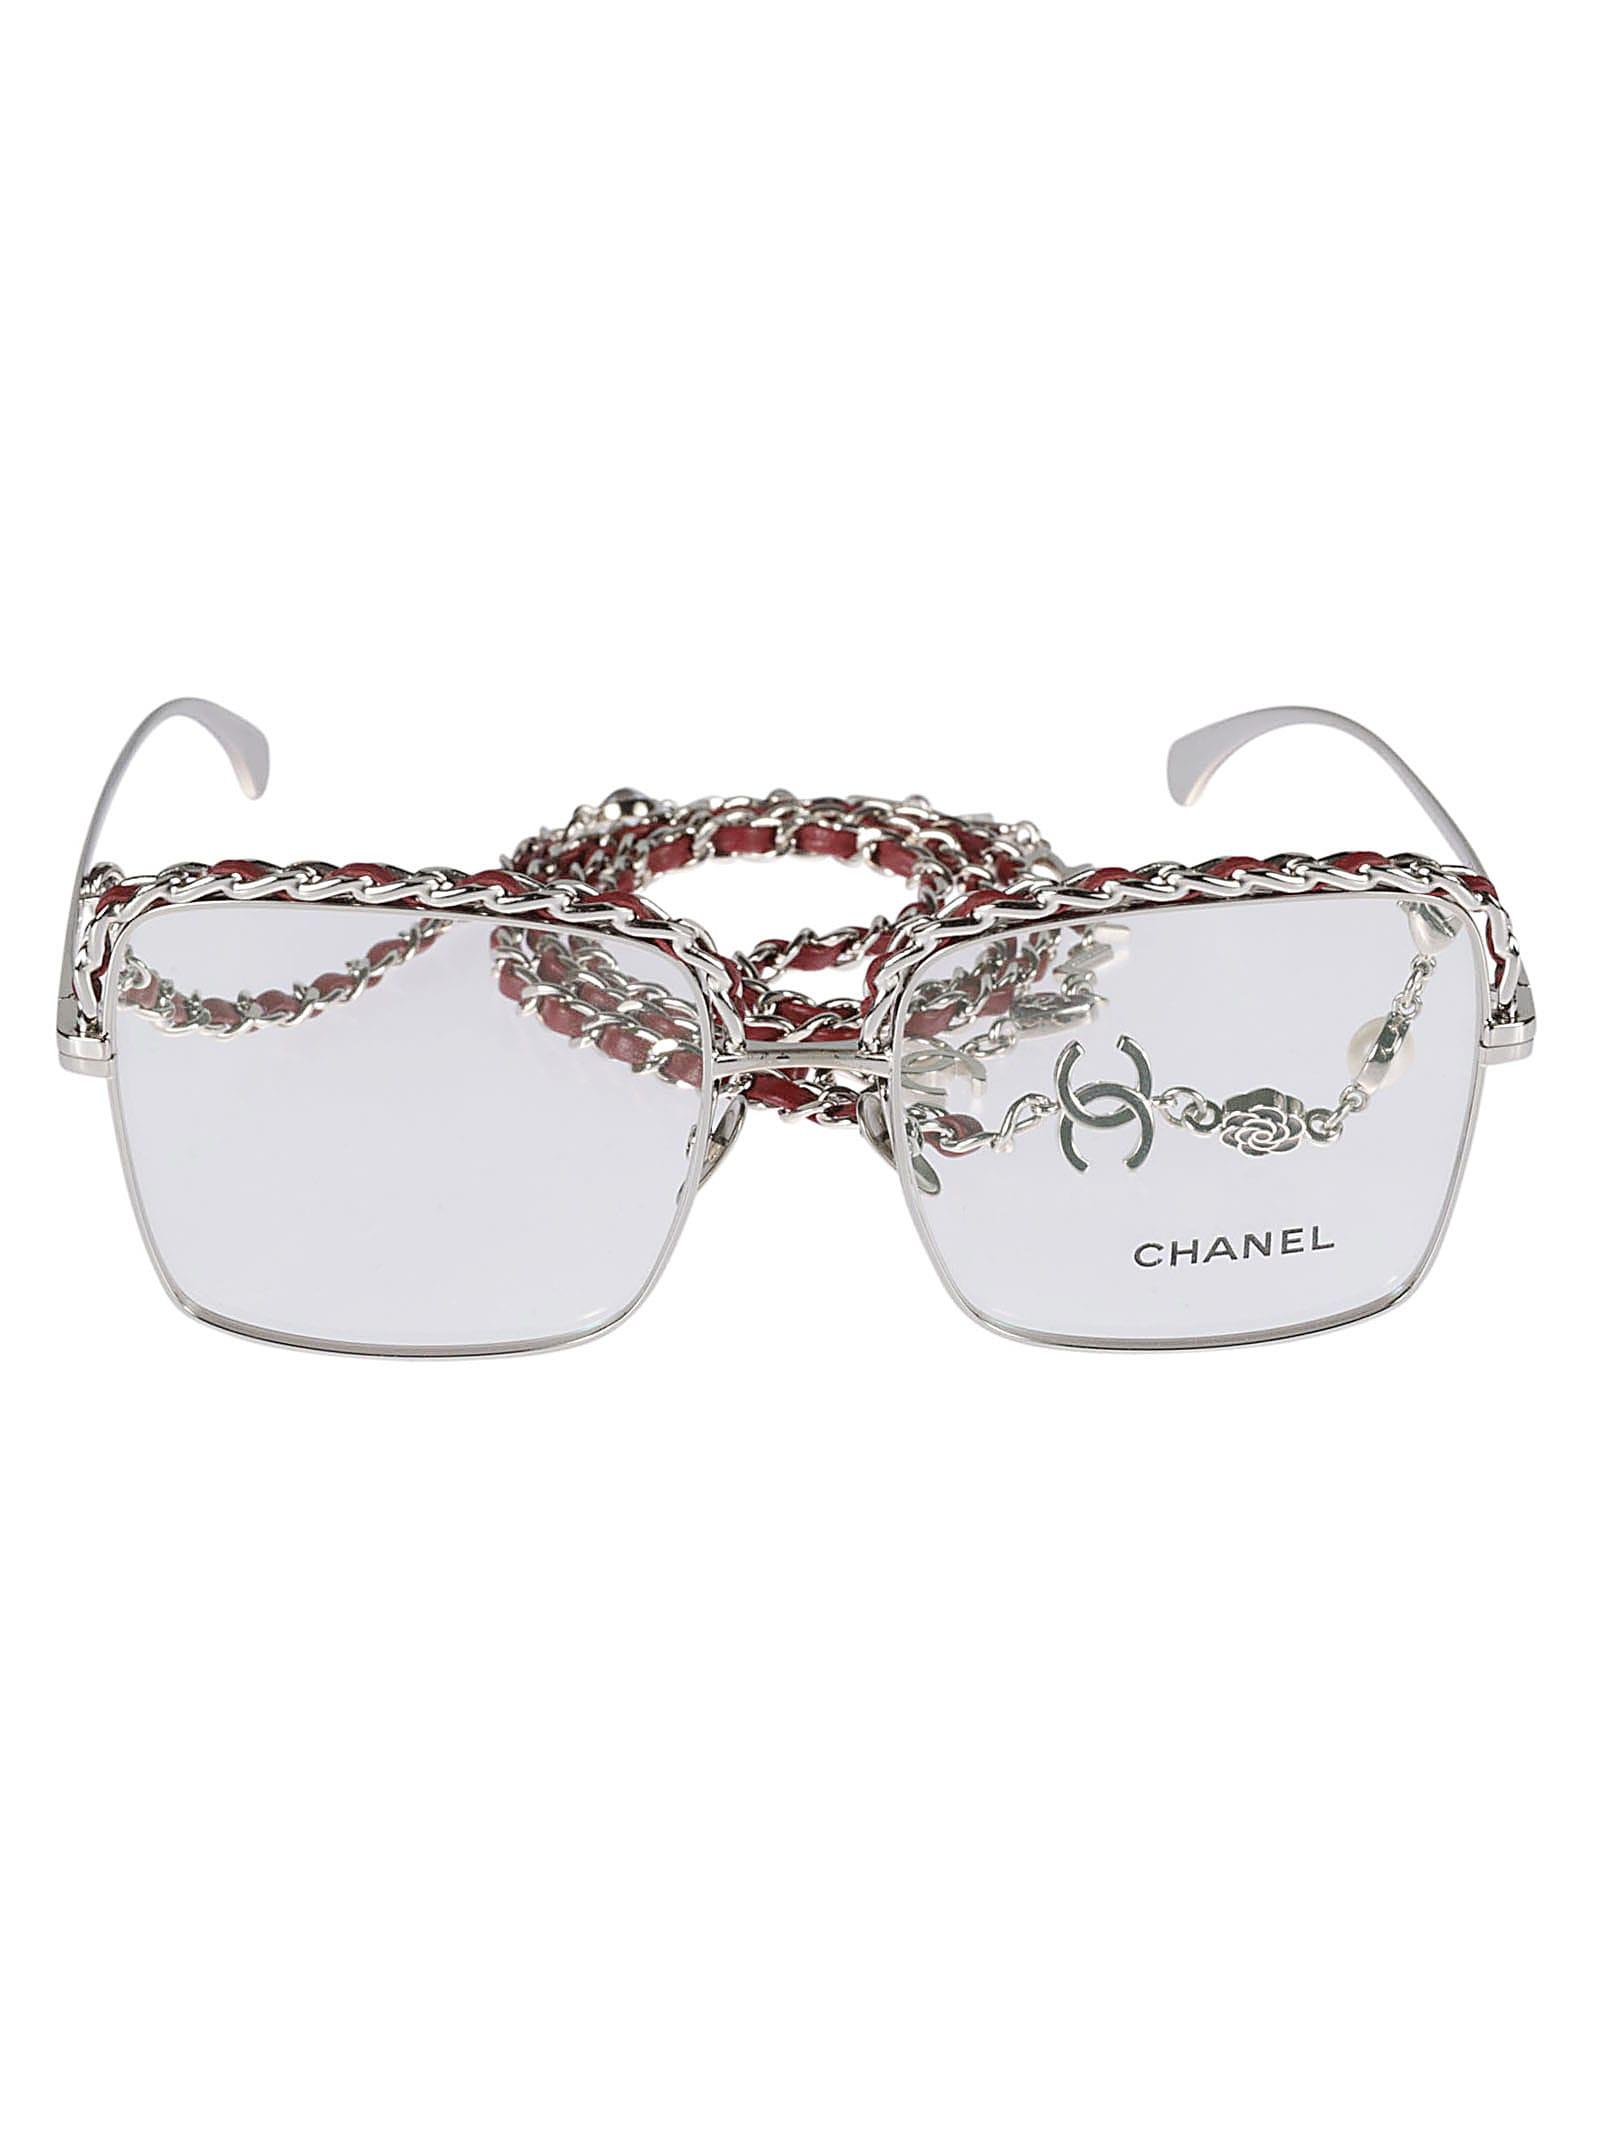 Rare Chanel black sunglasses with crystals rhinestones for Sale in